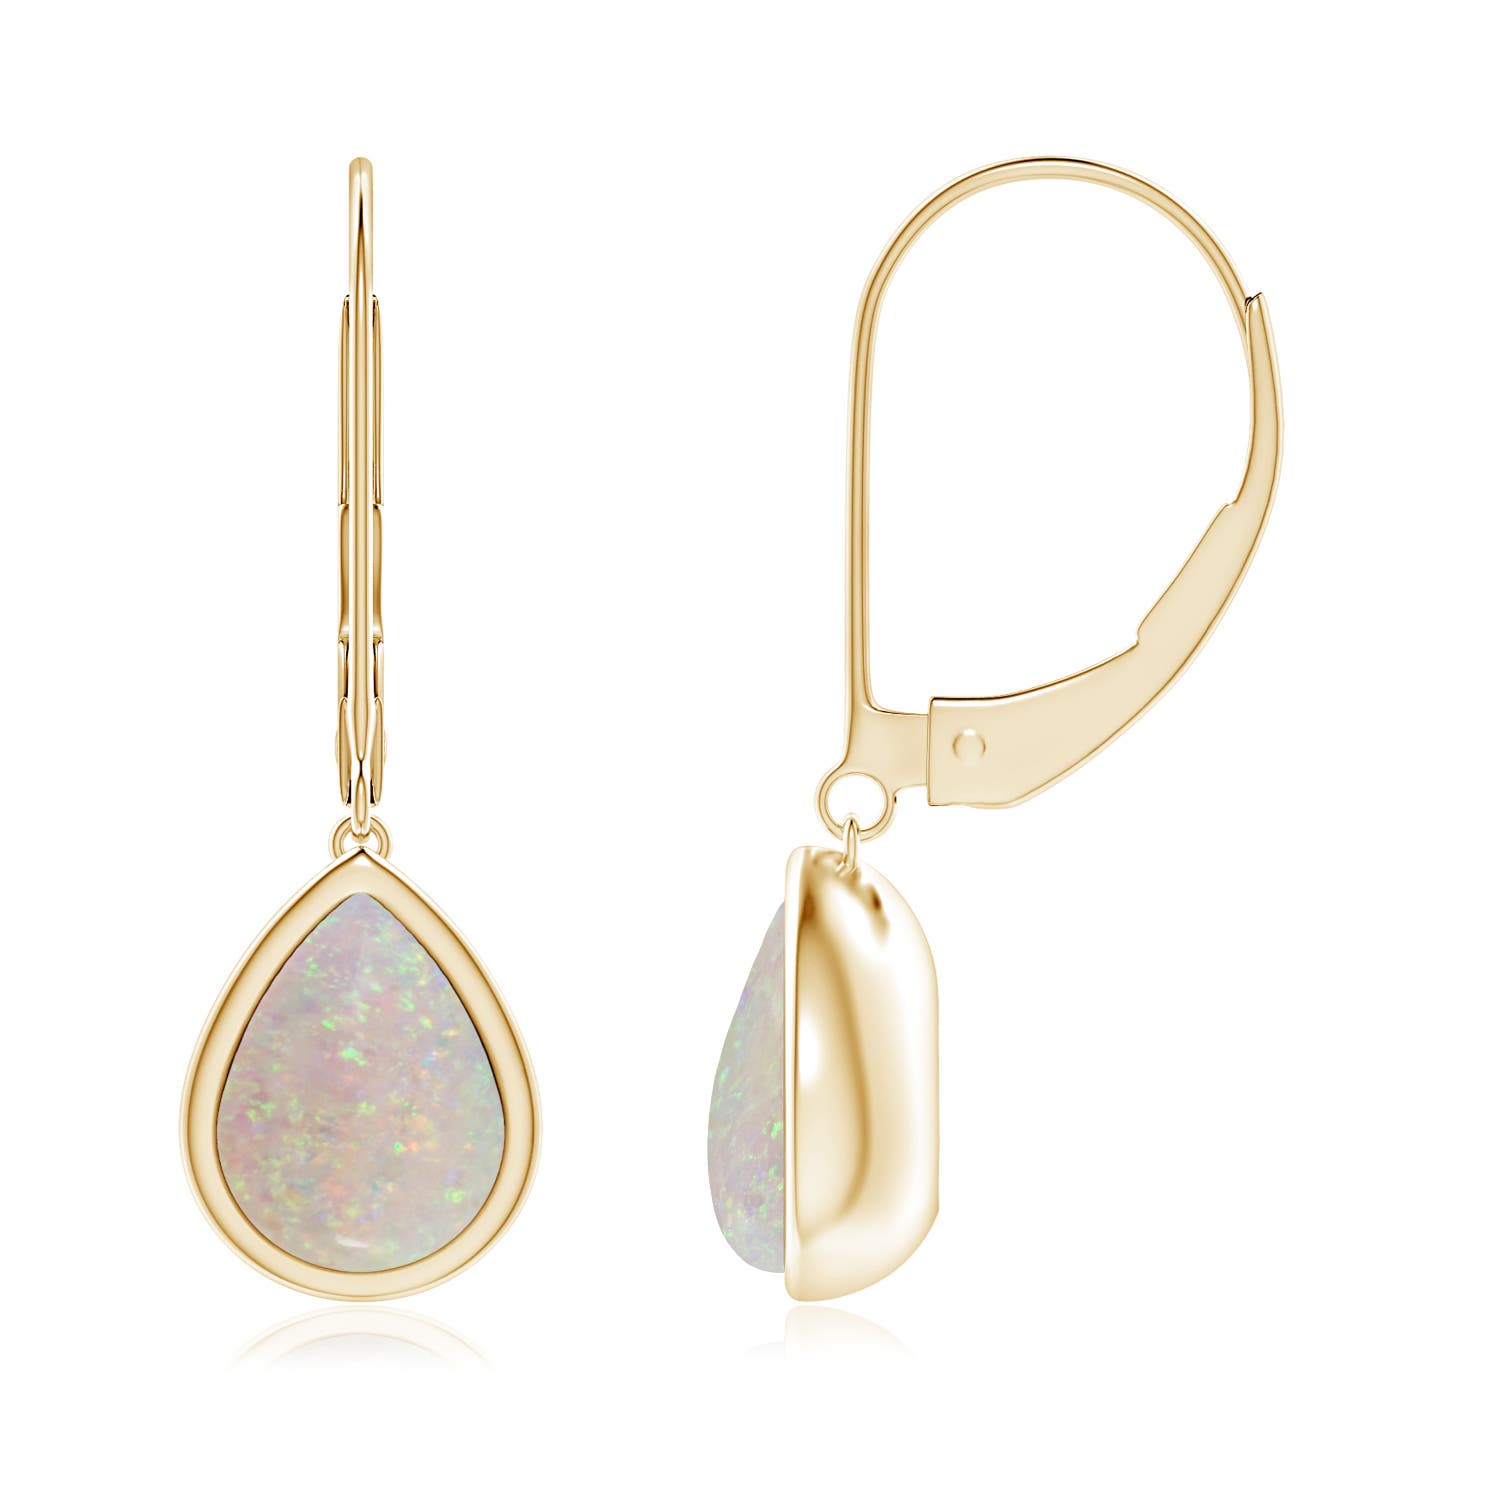 AA - Opal / 1.4 CT / 14 KT Yellow Gold